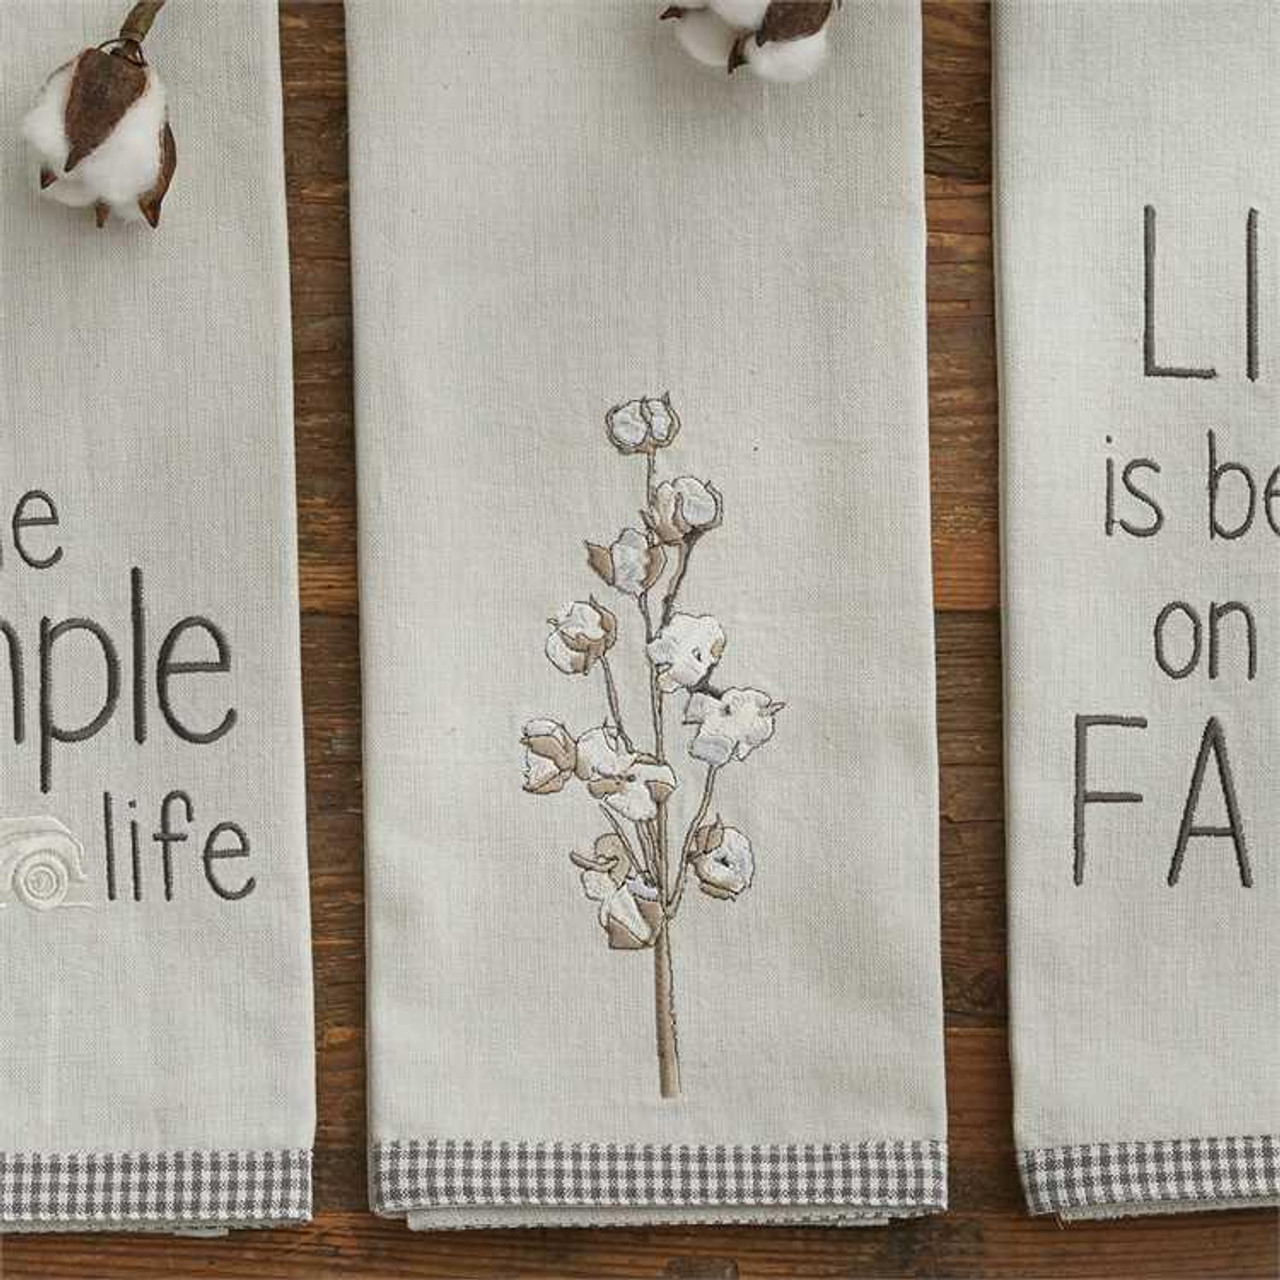 https://cdn11.bigcommerce.com/s-tfdhmk/images/stencil/1280x1280/products/16568/178216/Cotton-Fields-Embroidered-Dishtowels-Set-of-2-762242433298_image1__24340.1689053426.jpg?c=2